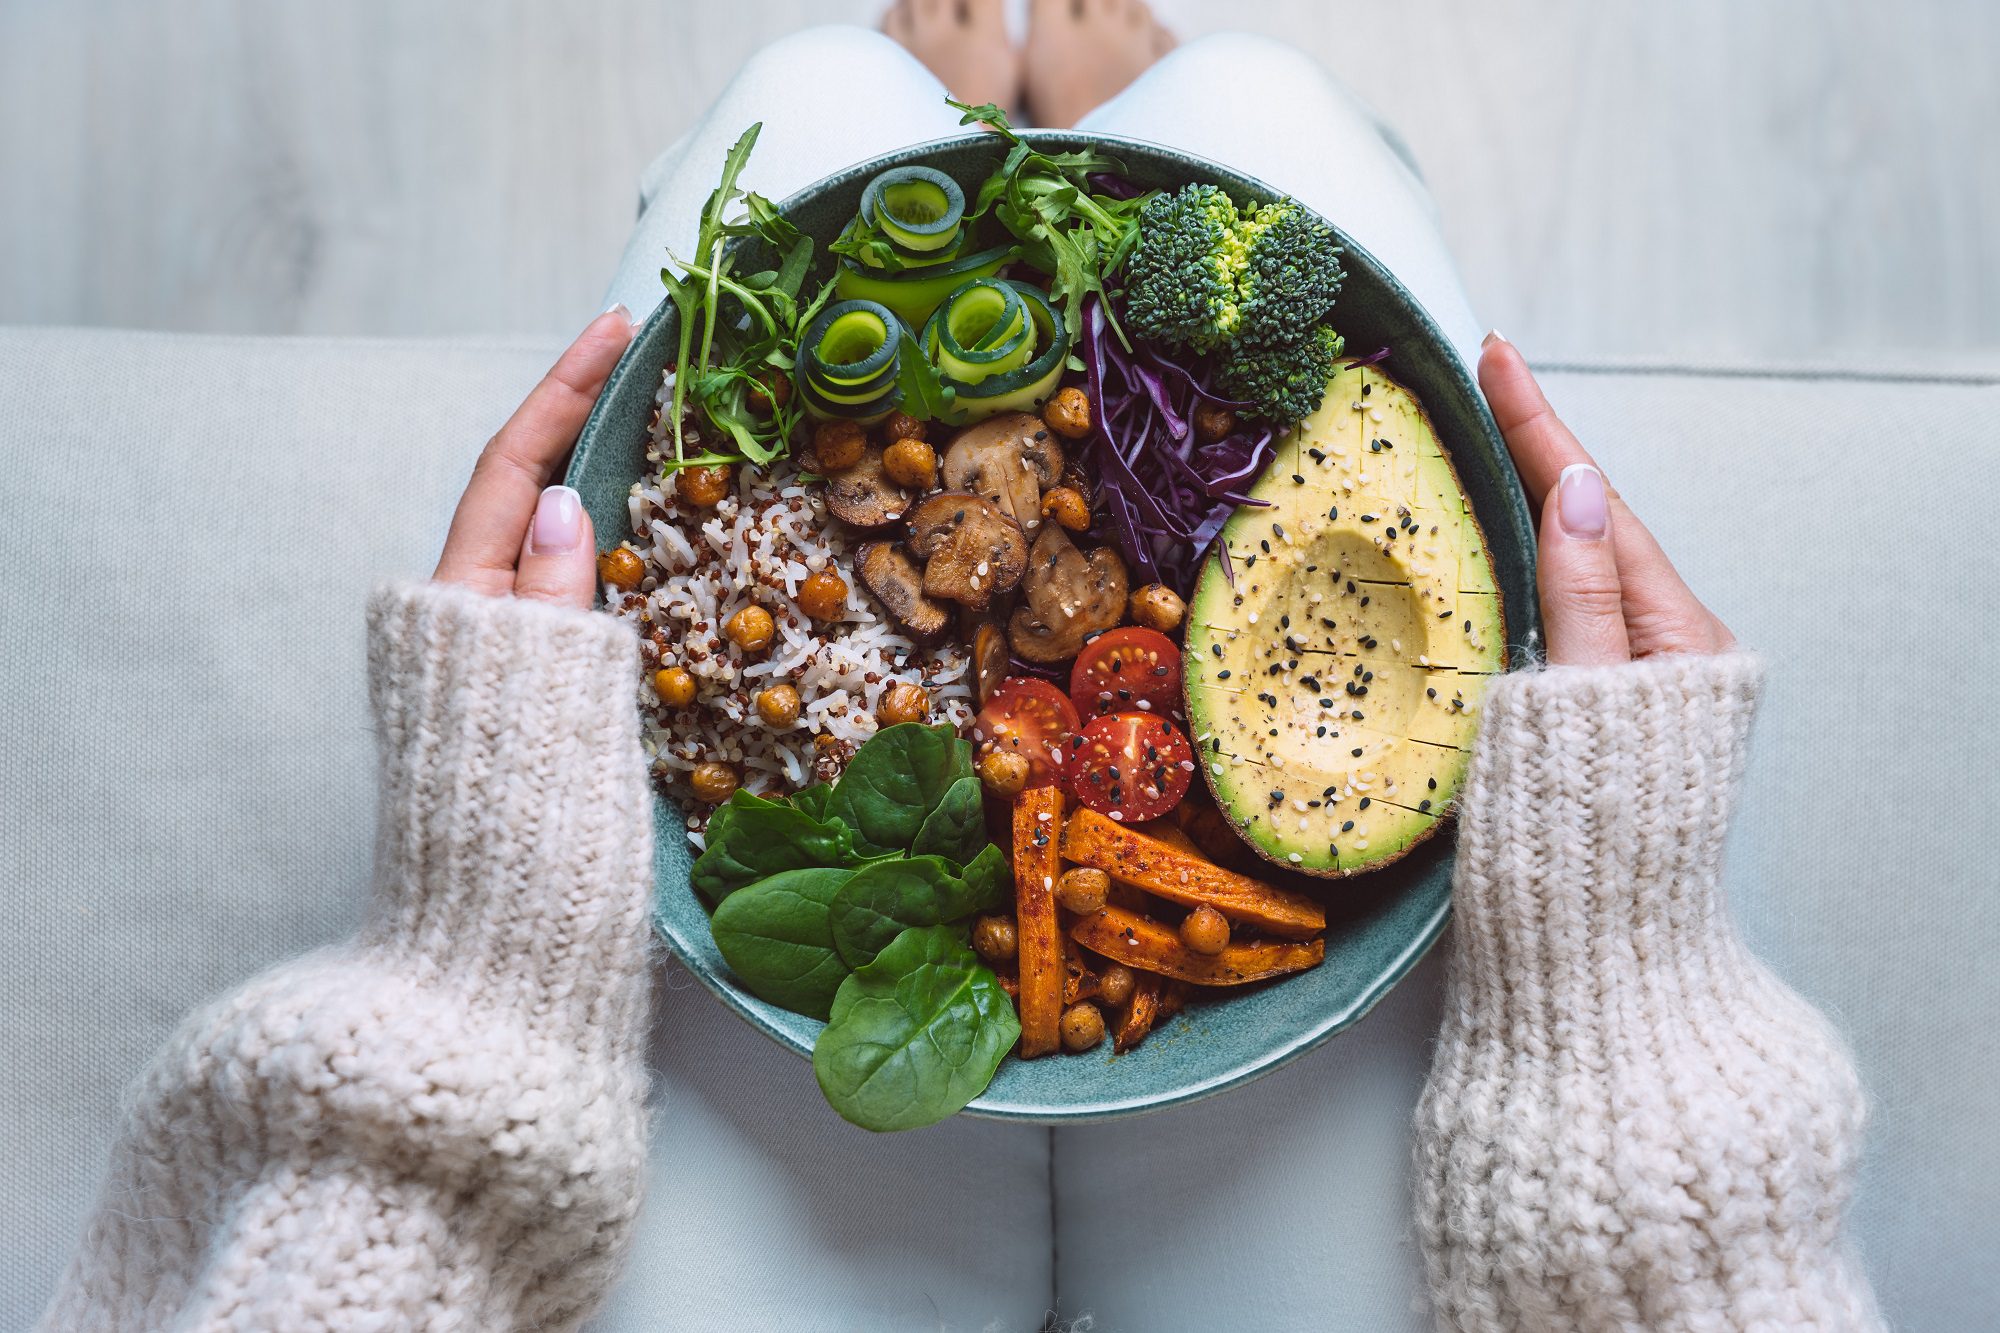 How a PlantBased Diet May Help You Prevent Cancer and Manage Side